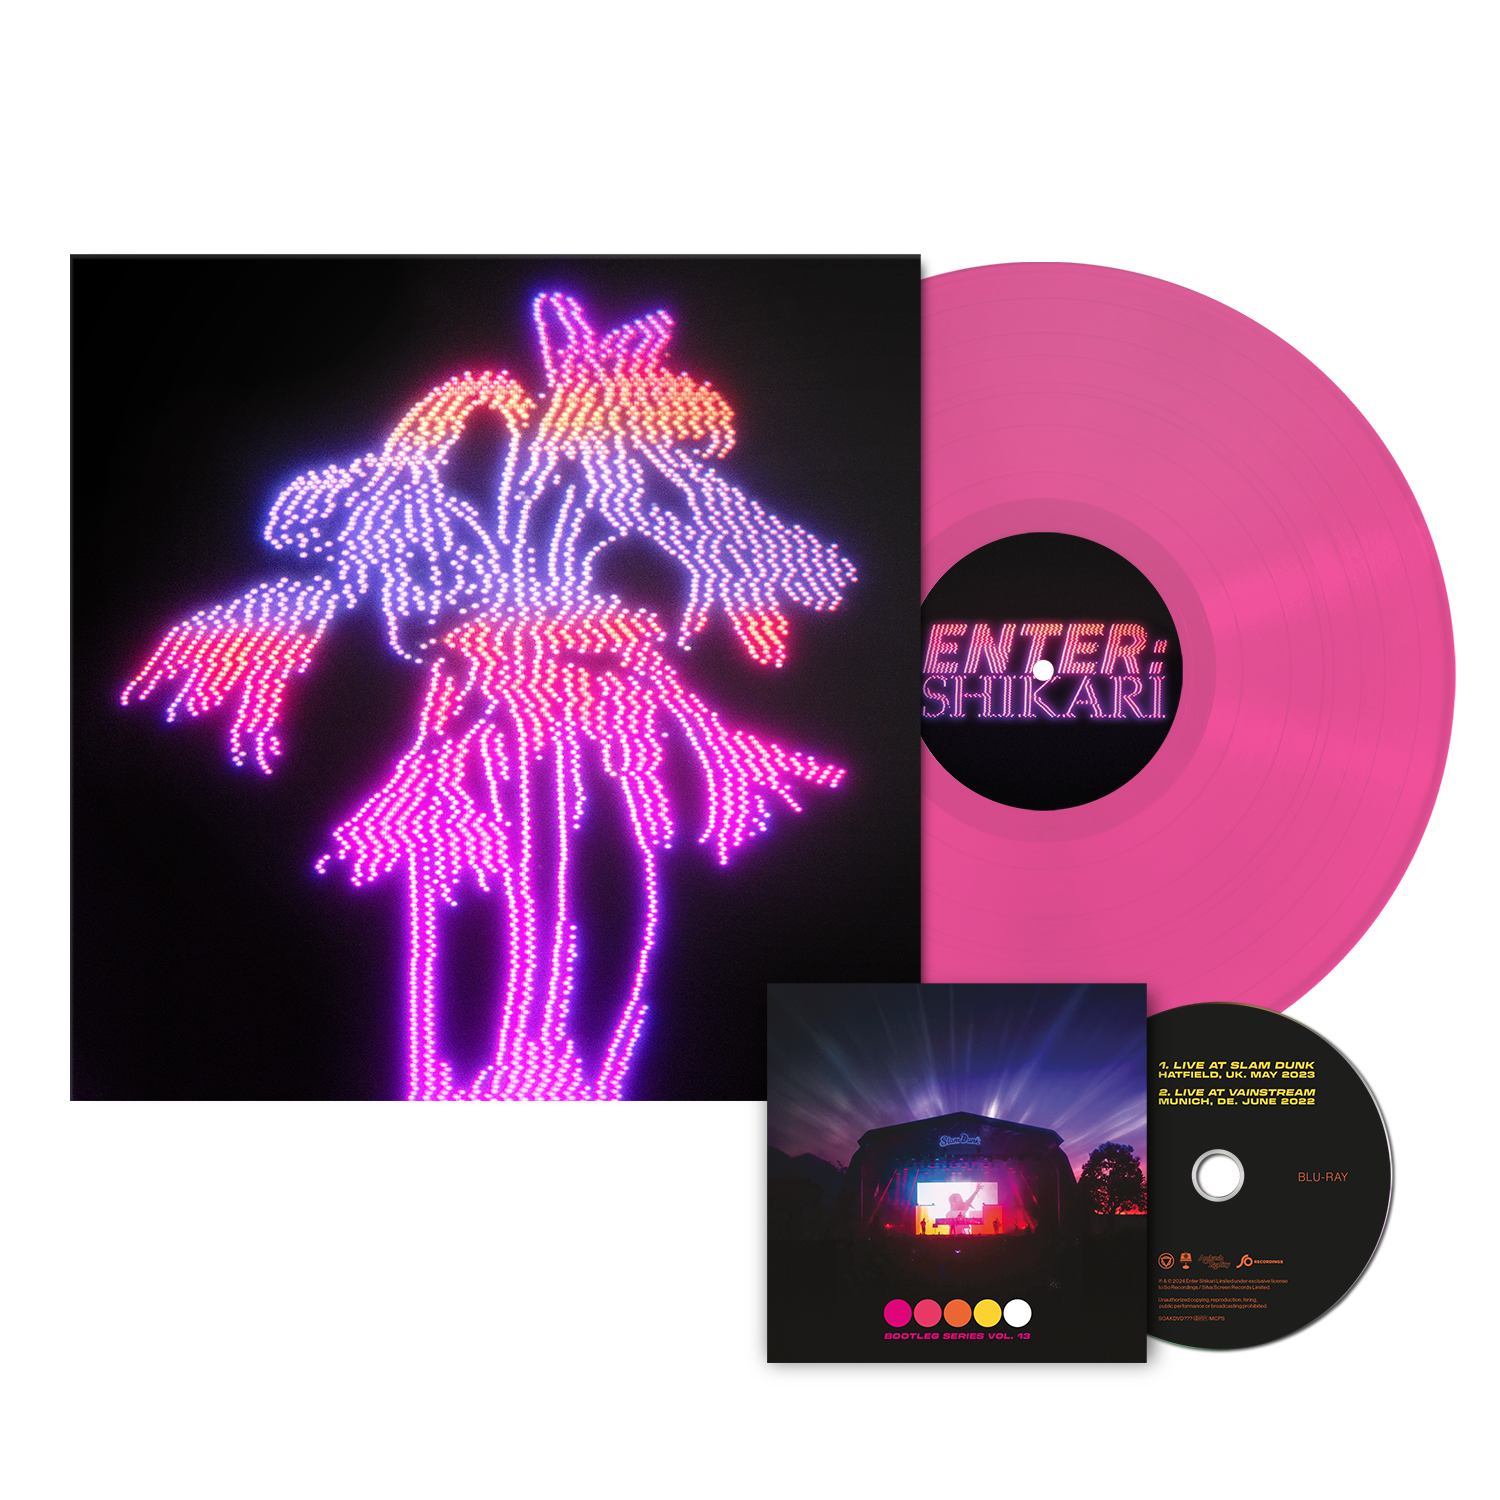 A Kiss For The Whole World: Transparent Neon Pink Vinyl LP, Blu-Ray + Signed AKFTWW Print